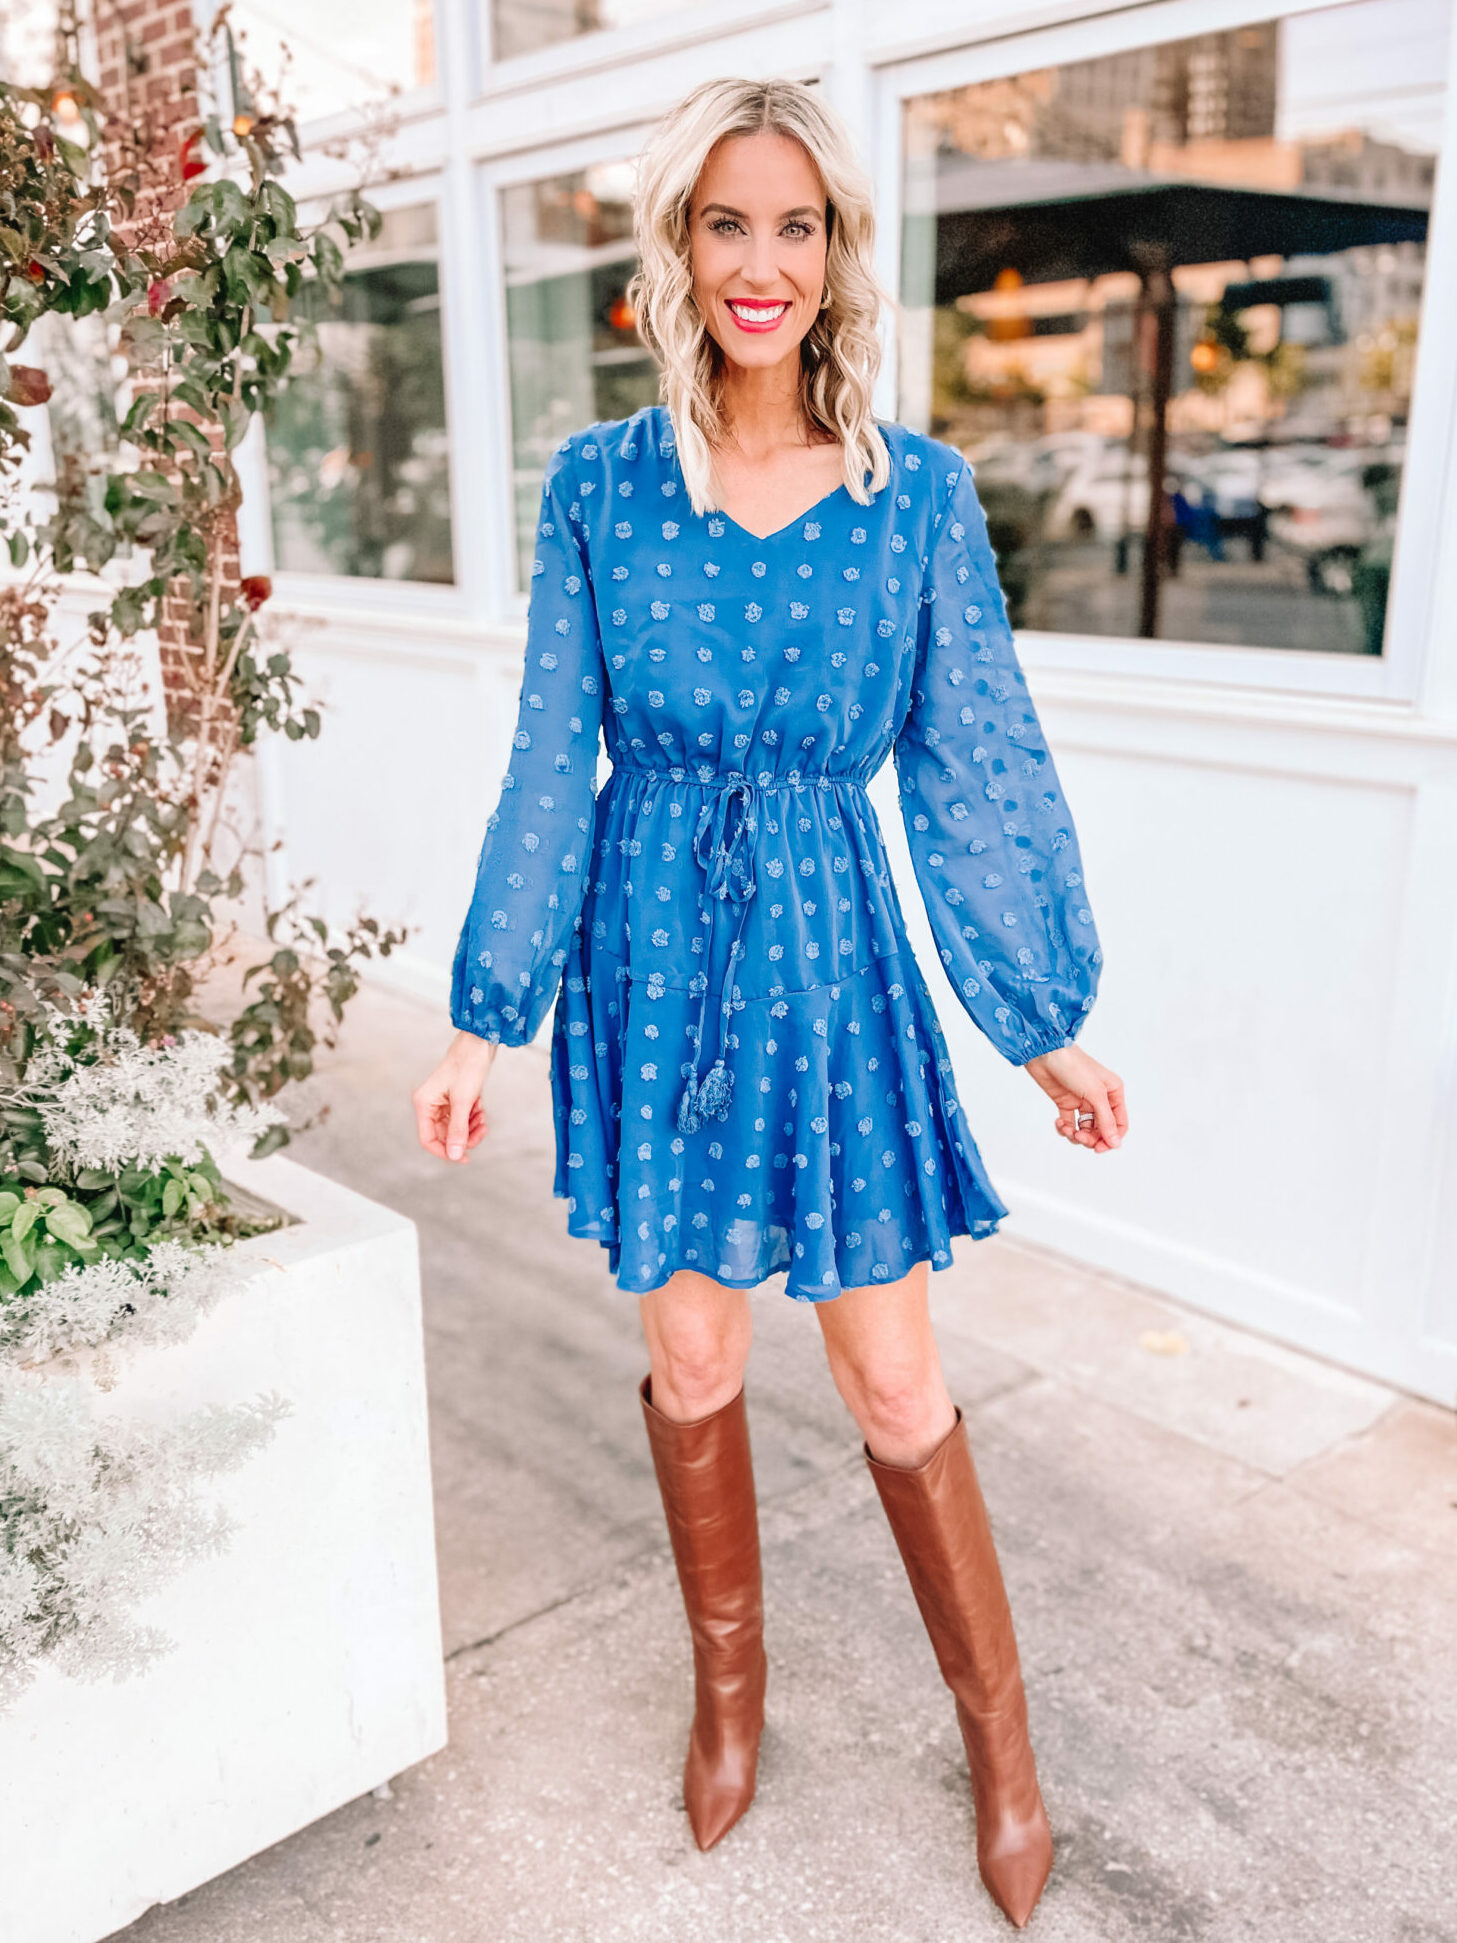 Looking for cute, affordable, and quick family photo outfits? I've got you covered with these Amazon fall family photo dresses! This blue swiss dot one is gorgeous!